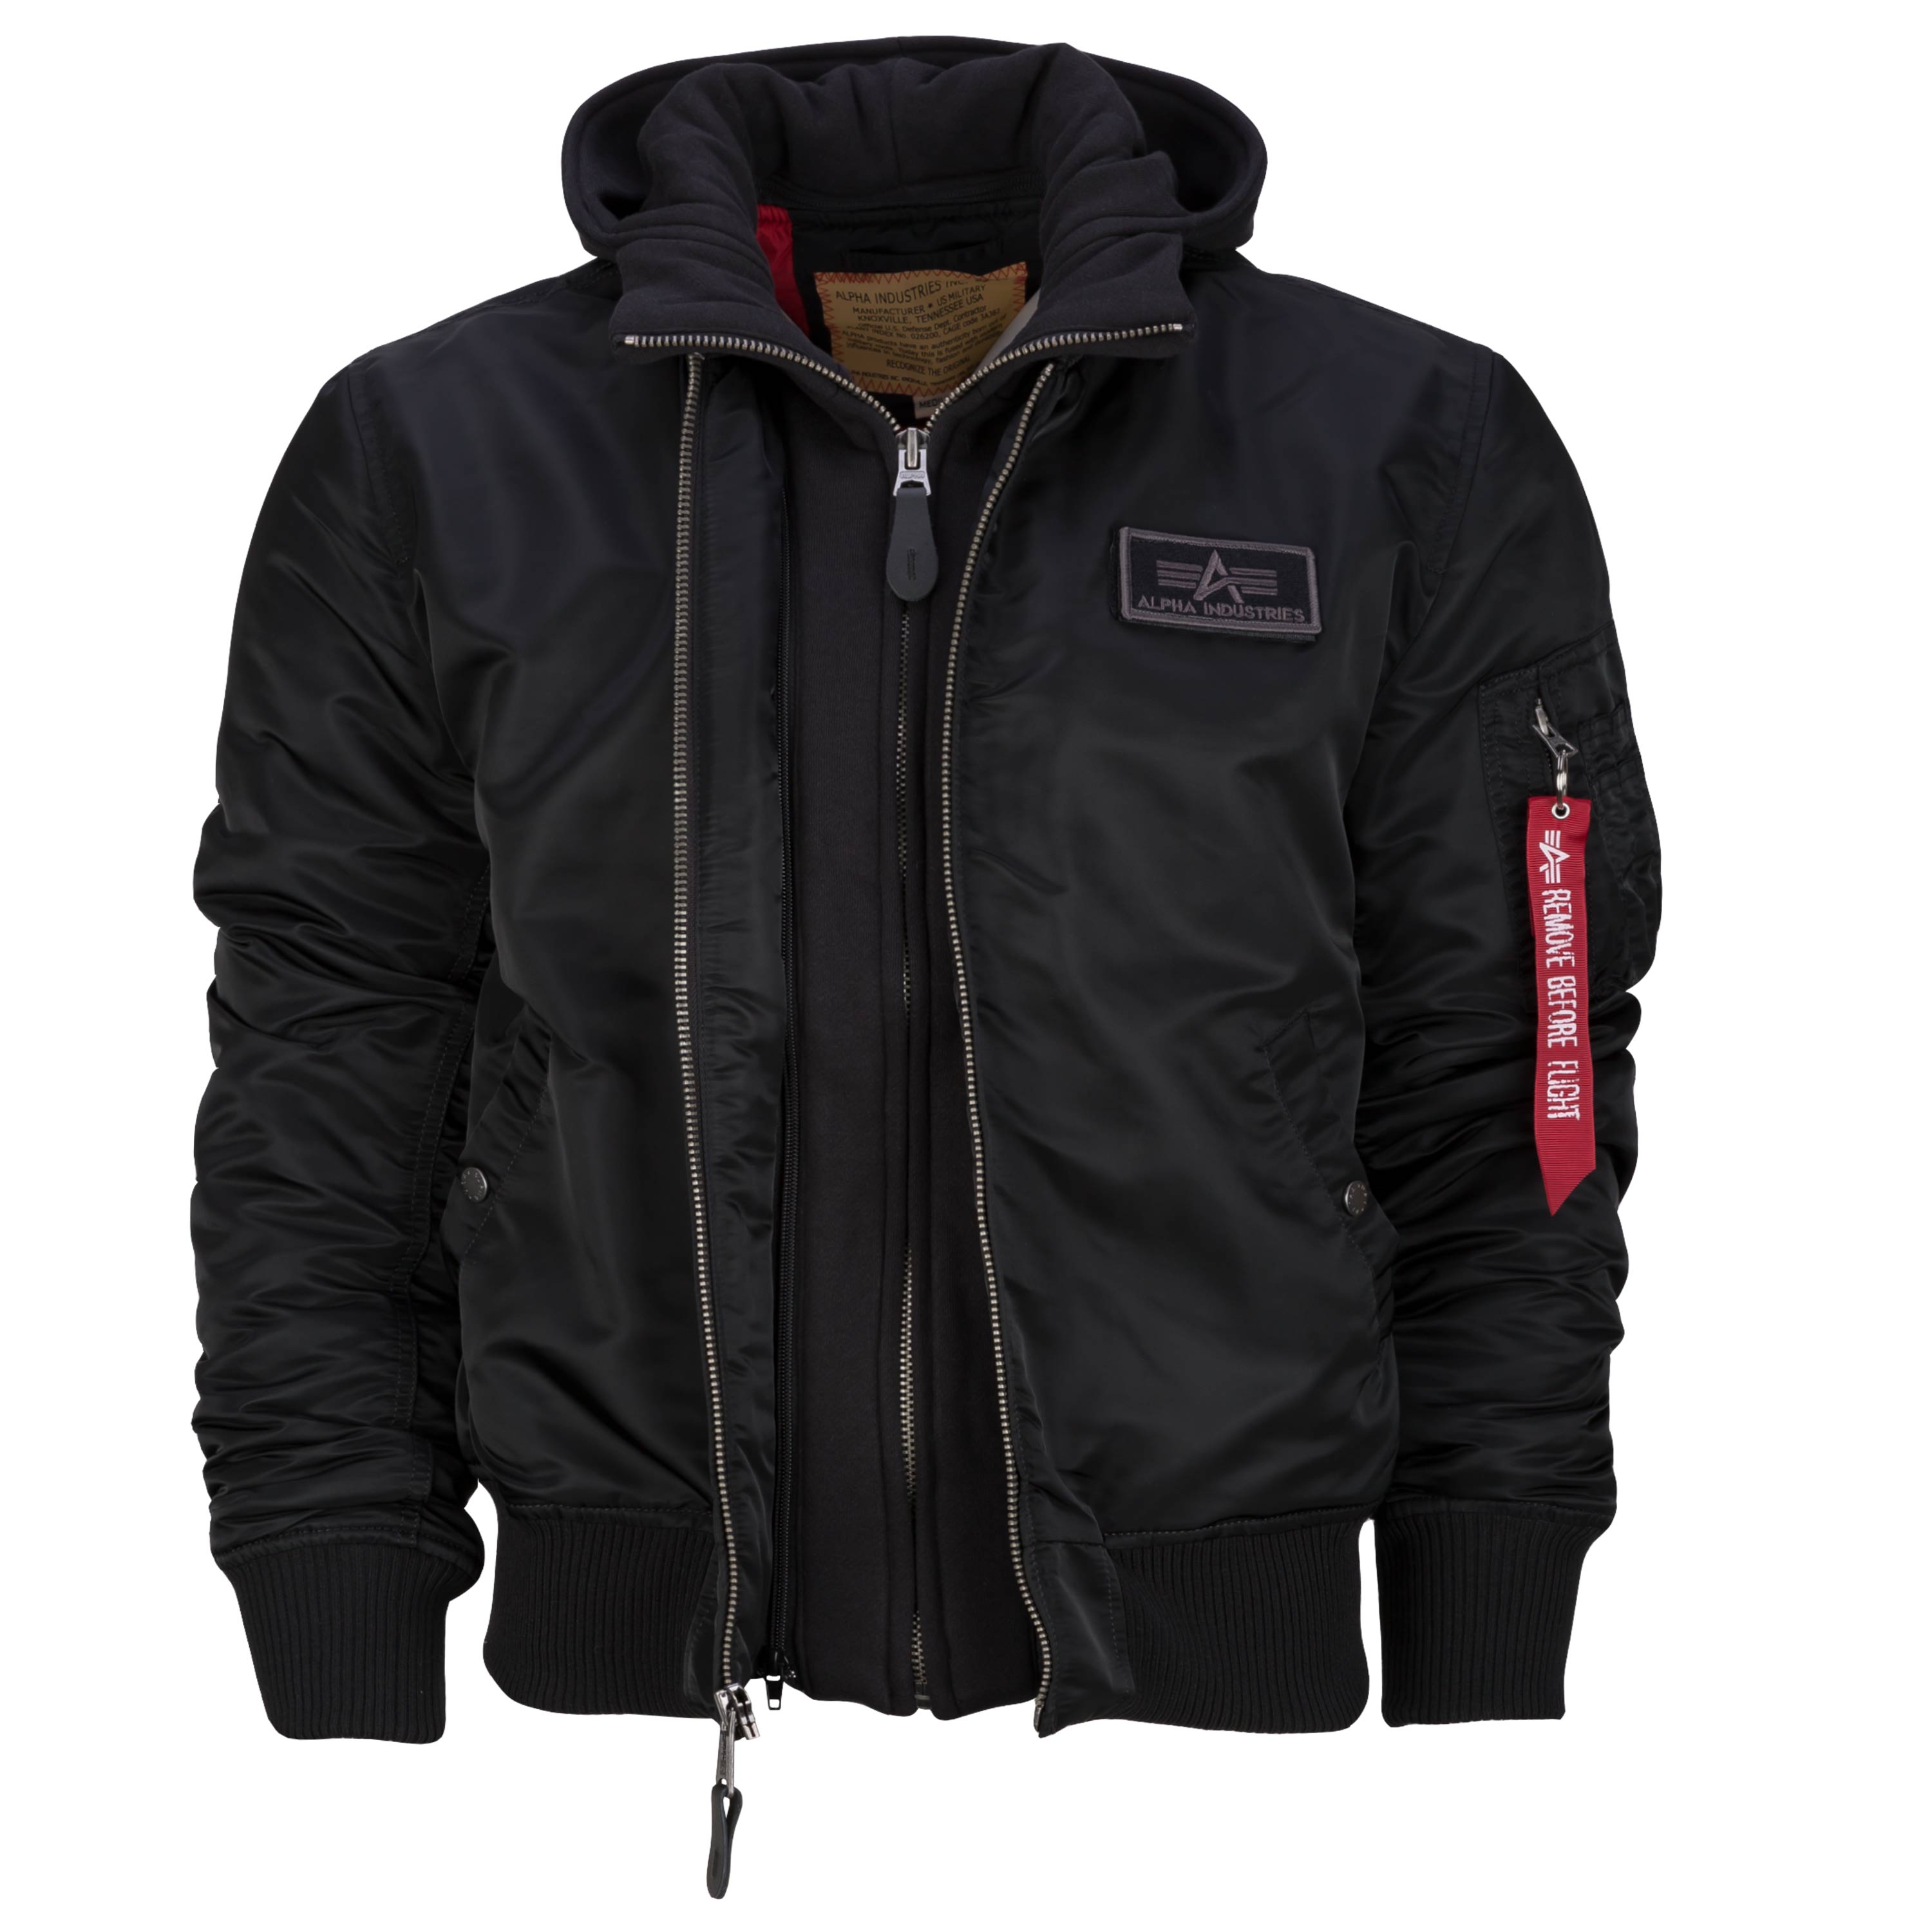 drawer Absolute limbs Purchase the Alpha Industries Jacket MA-1 D-Tec black II by ASMC